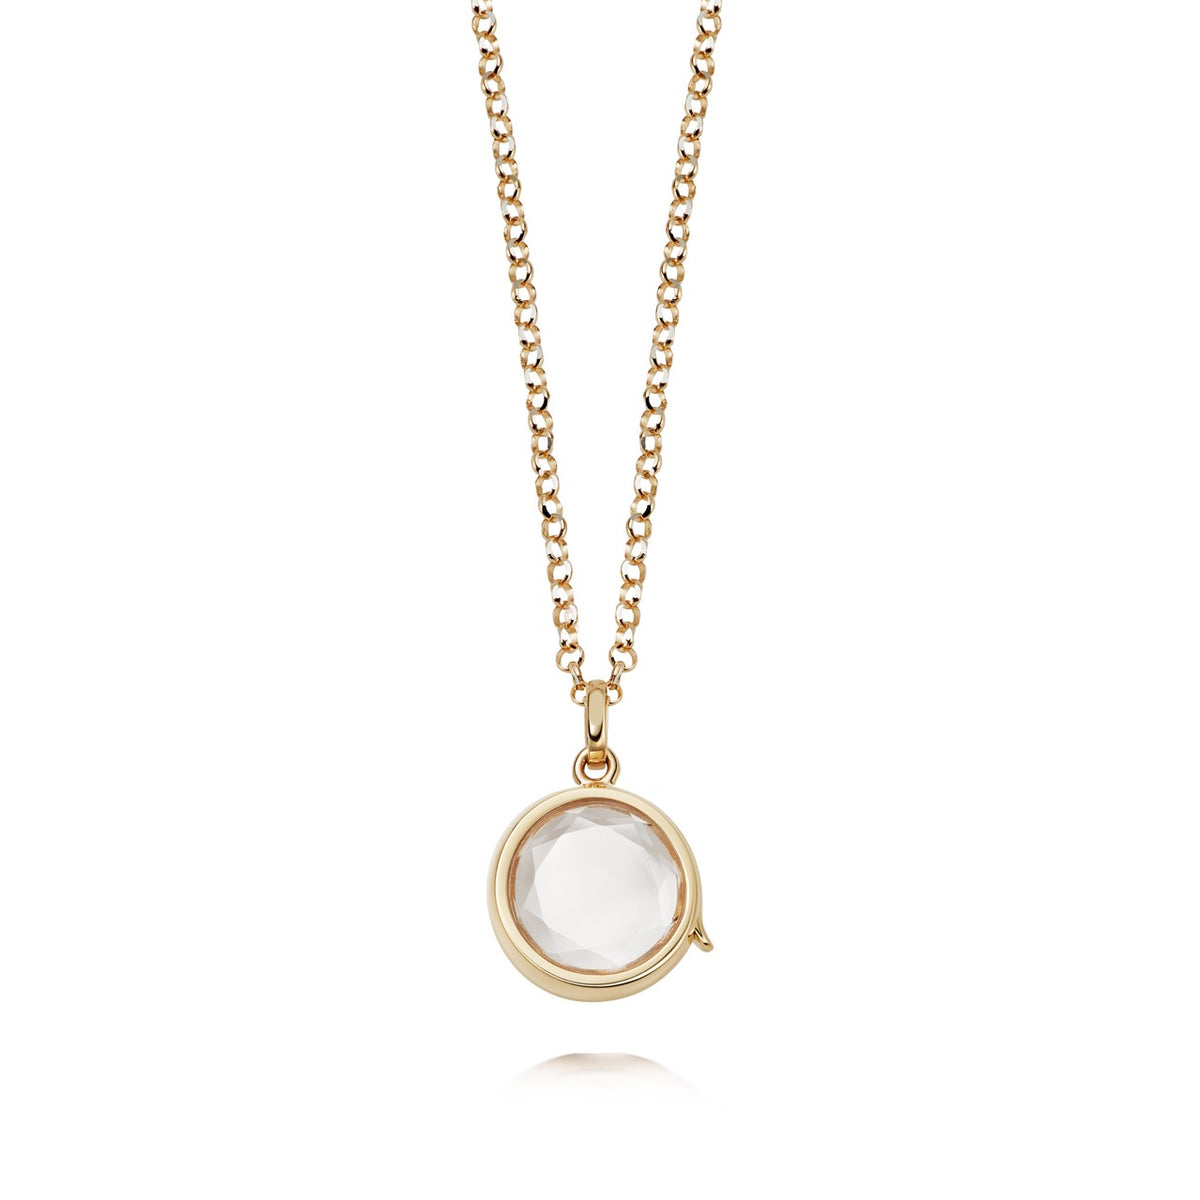 Small Round Gold Locket Pendant on Adjustable Rolo Gold Chain